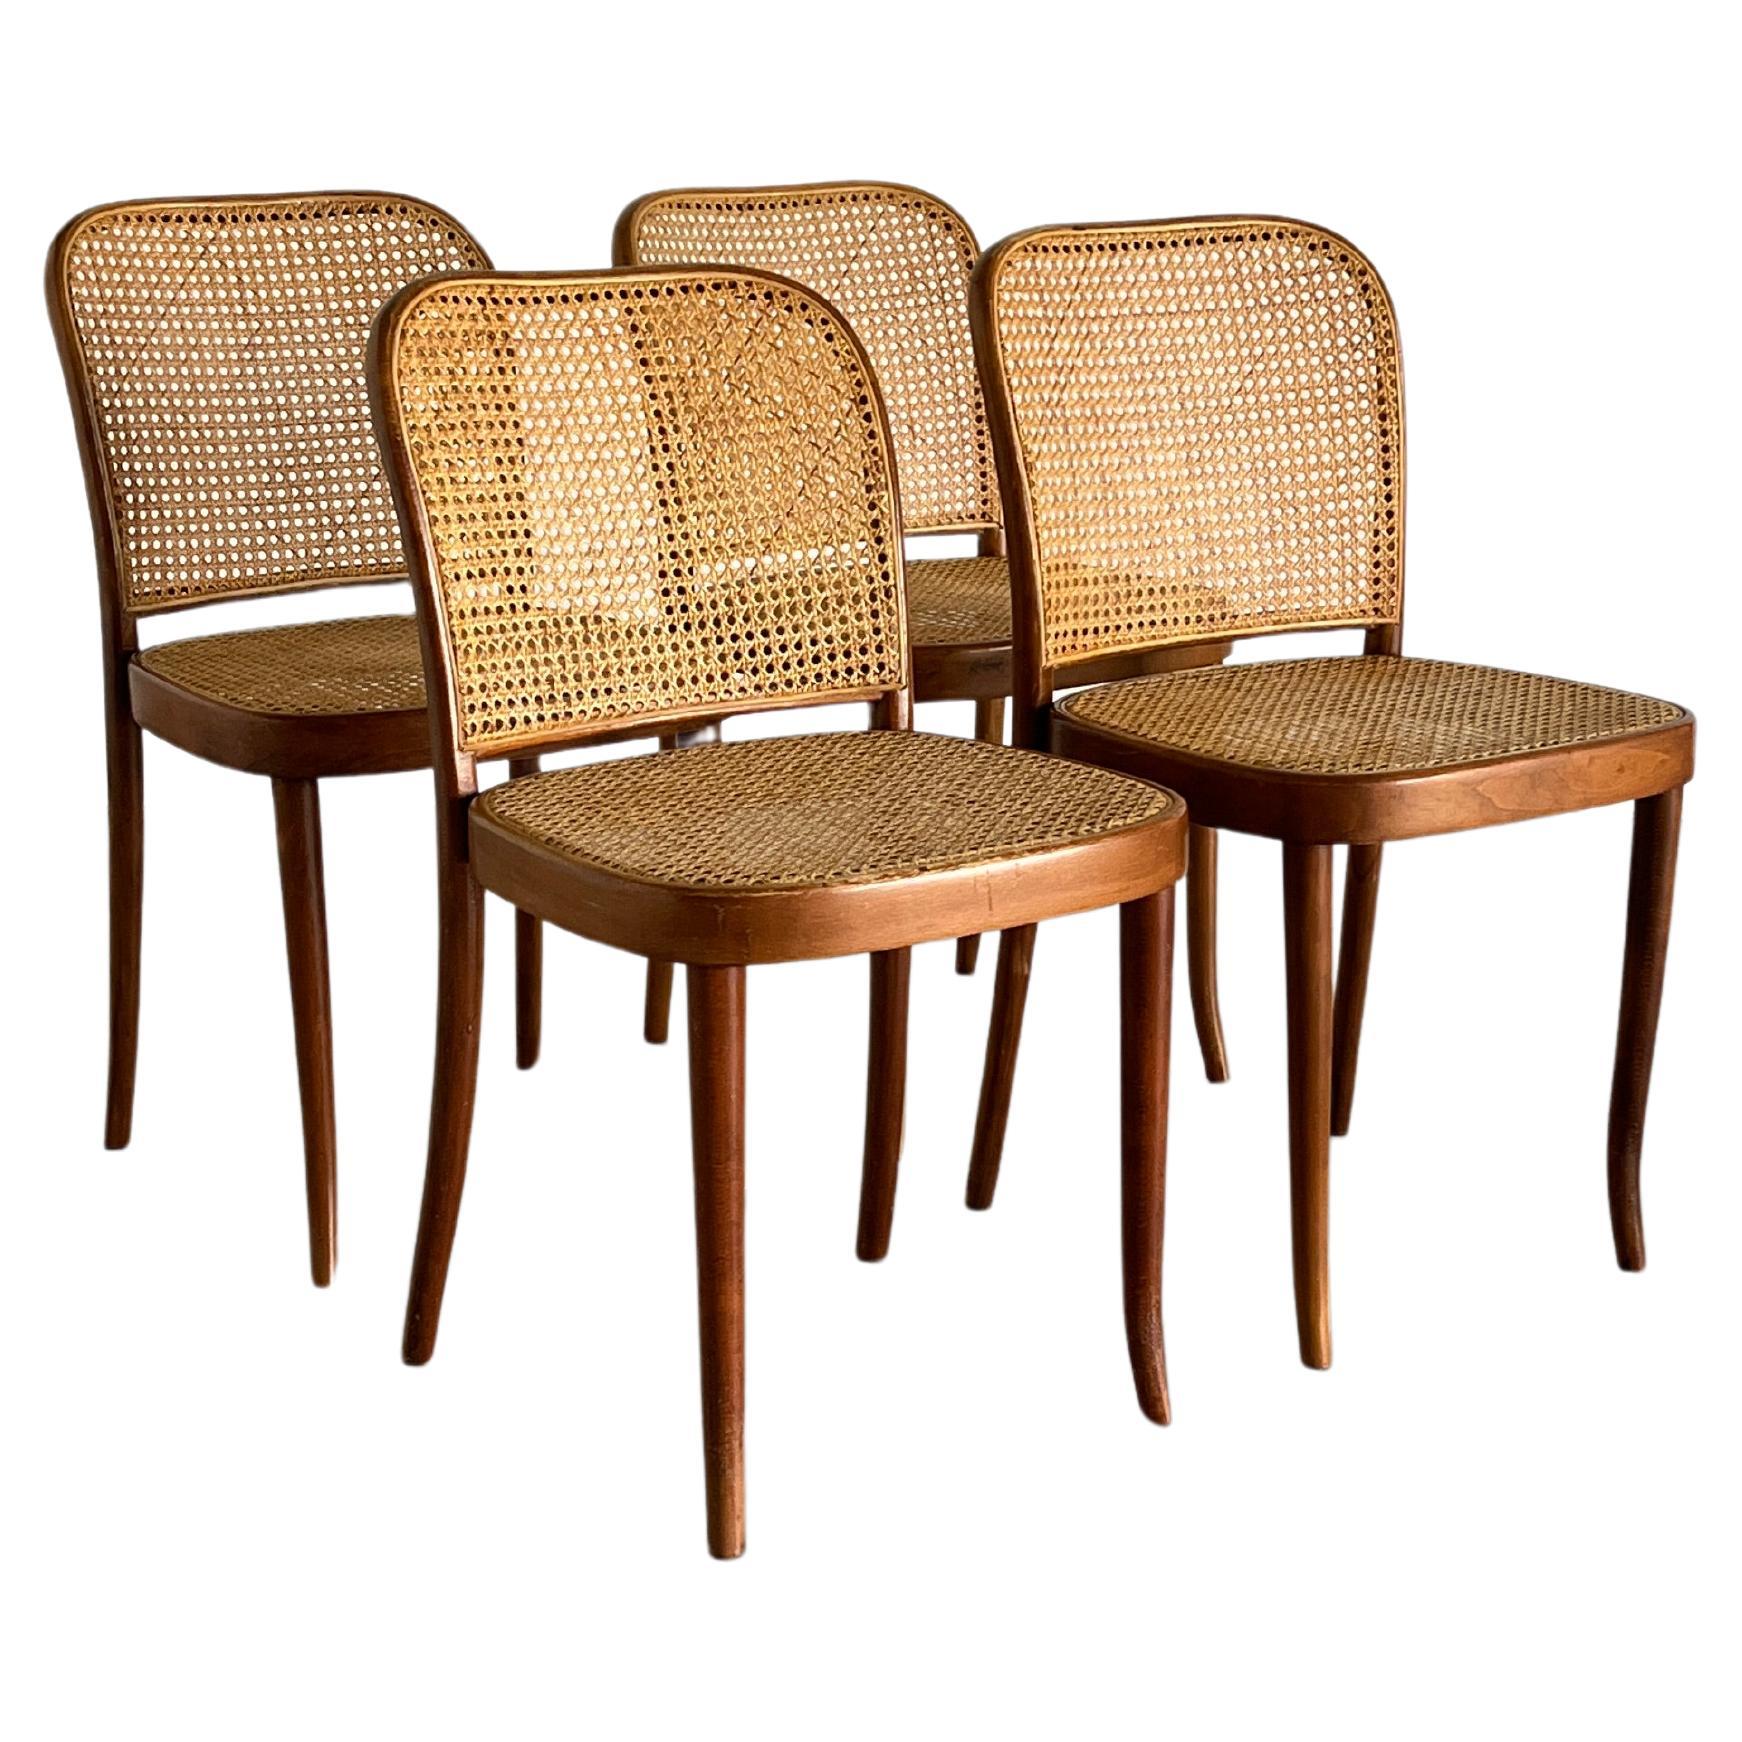 Set of 4 Vintage Thonet Bentwood No.811 Chairs, Designed by Josef Hoffman, 1970s